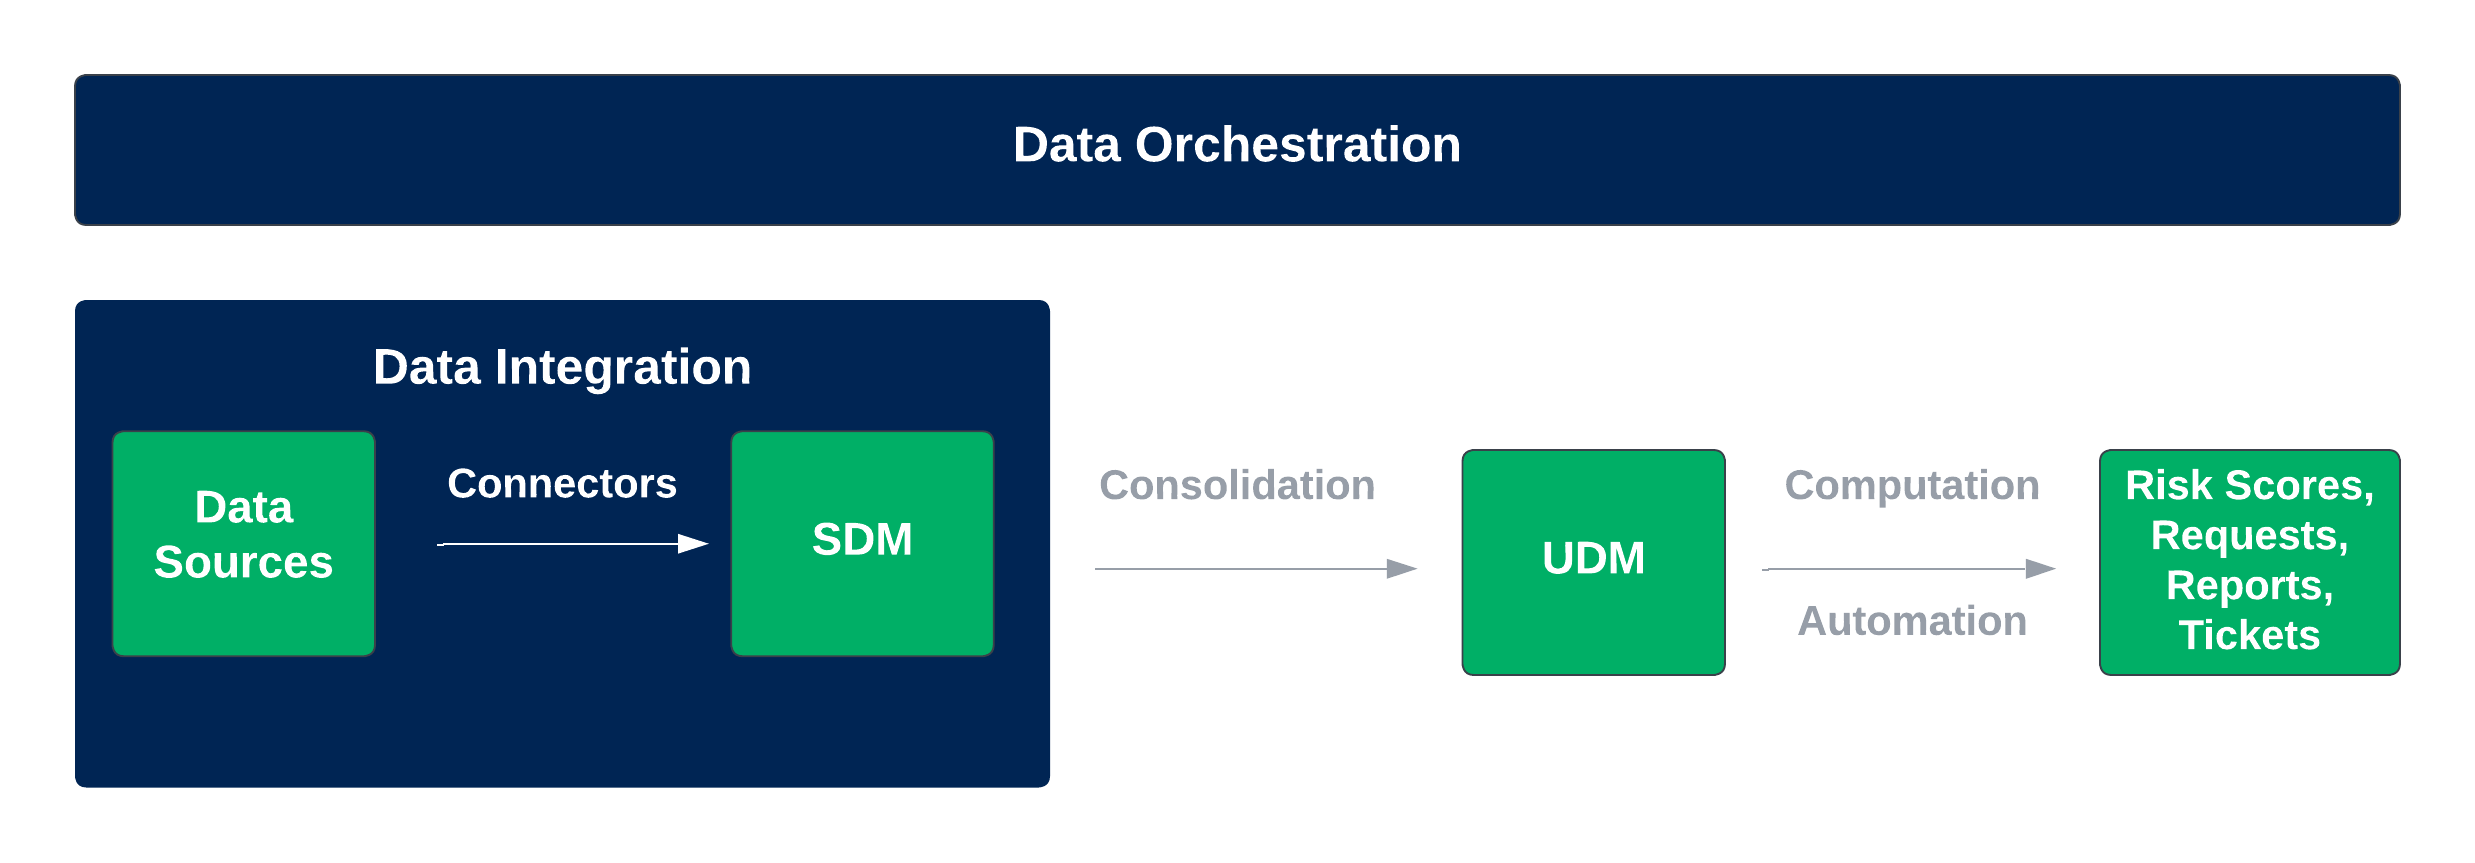 data orchestration and data integration diagram